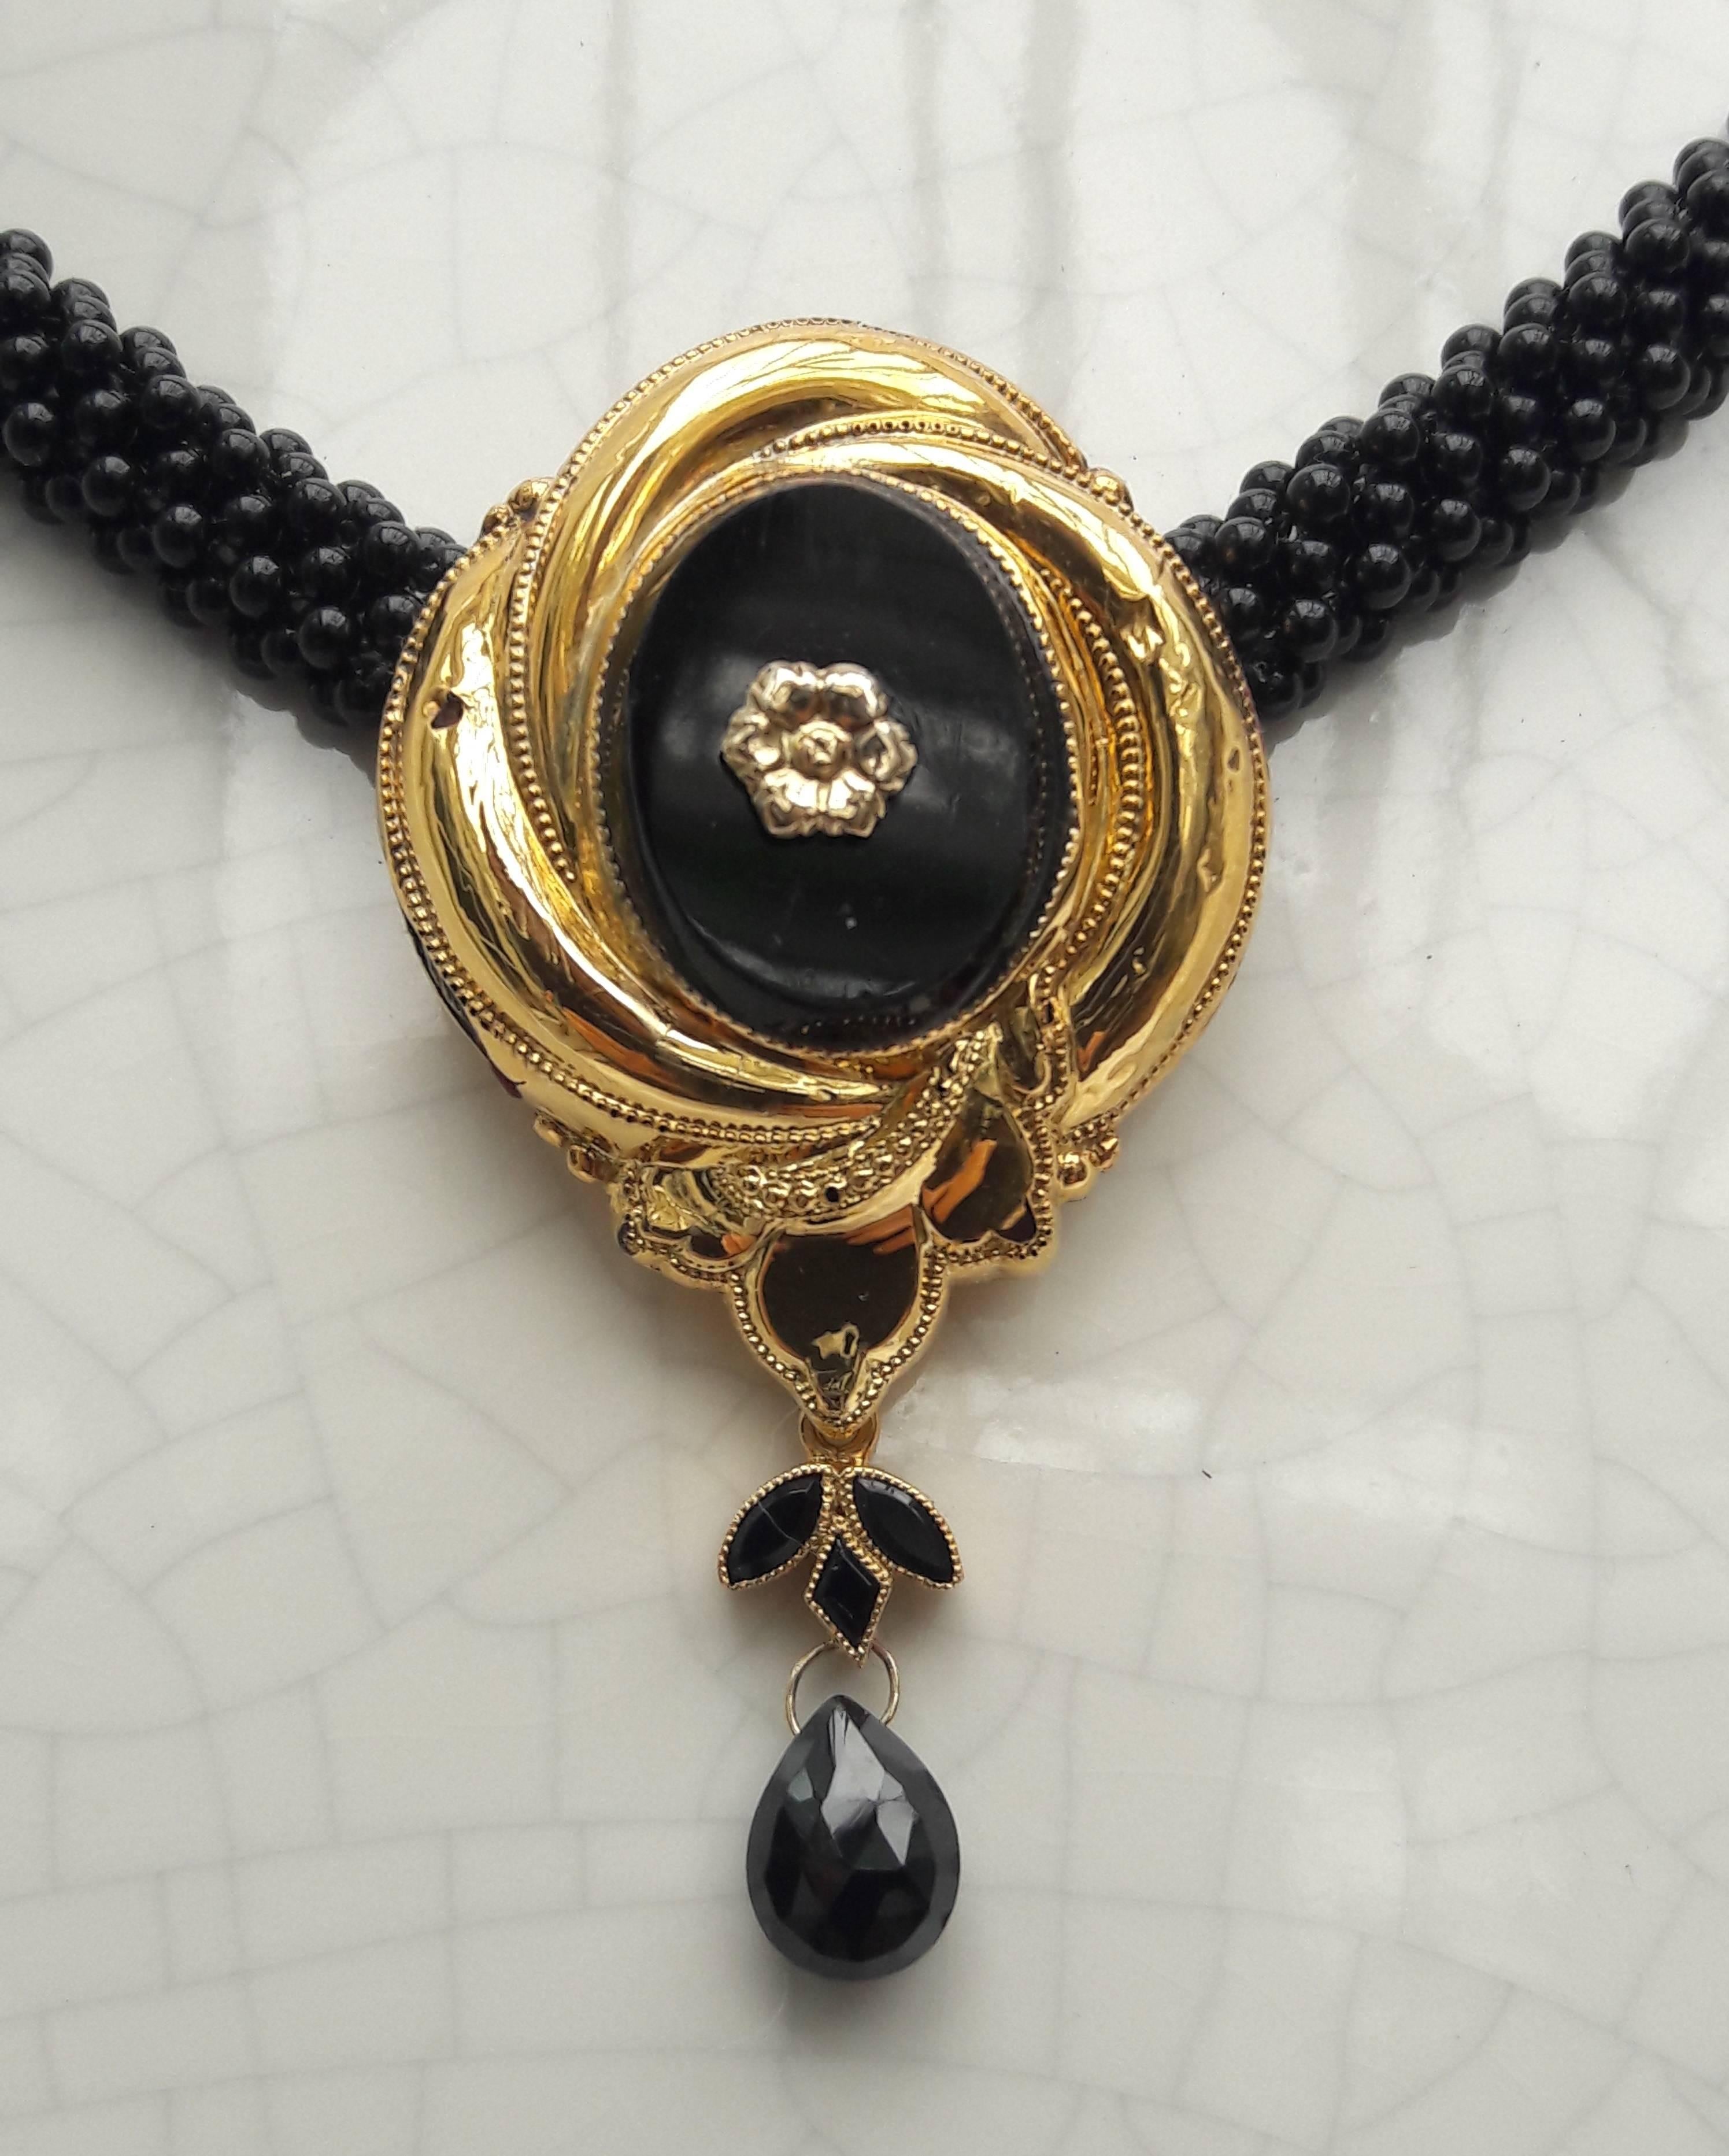 Artist Marina J. One-of-a-Kind Woven Black Onyx 3D Rope Bead Necklace